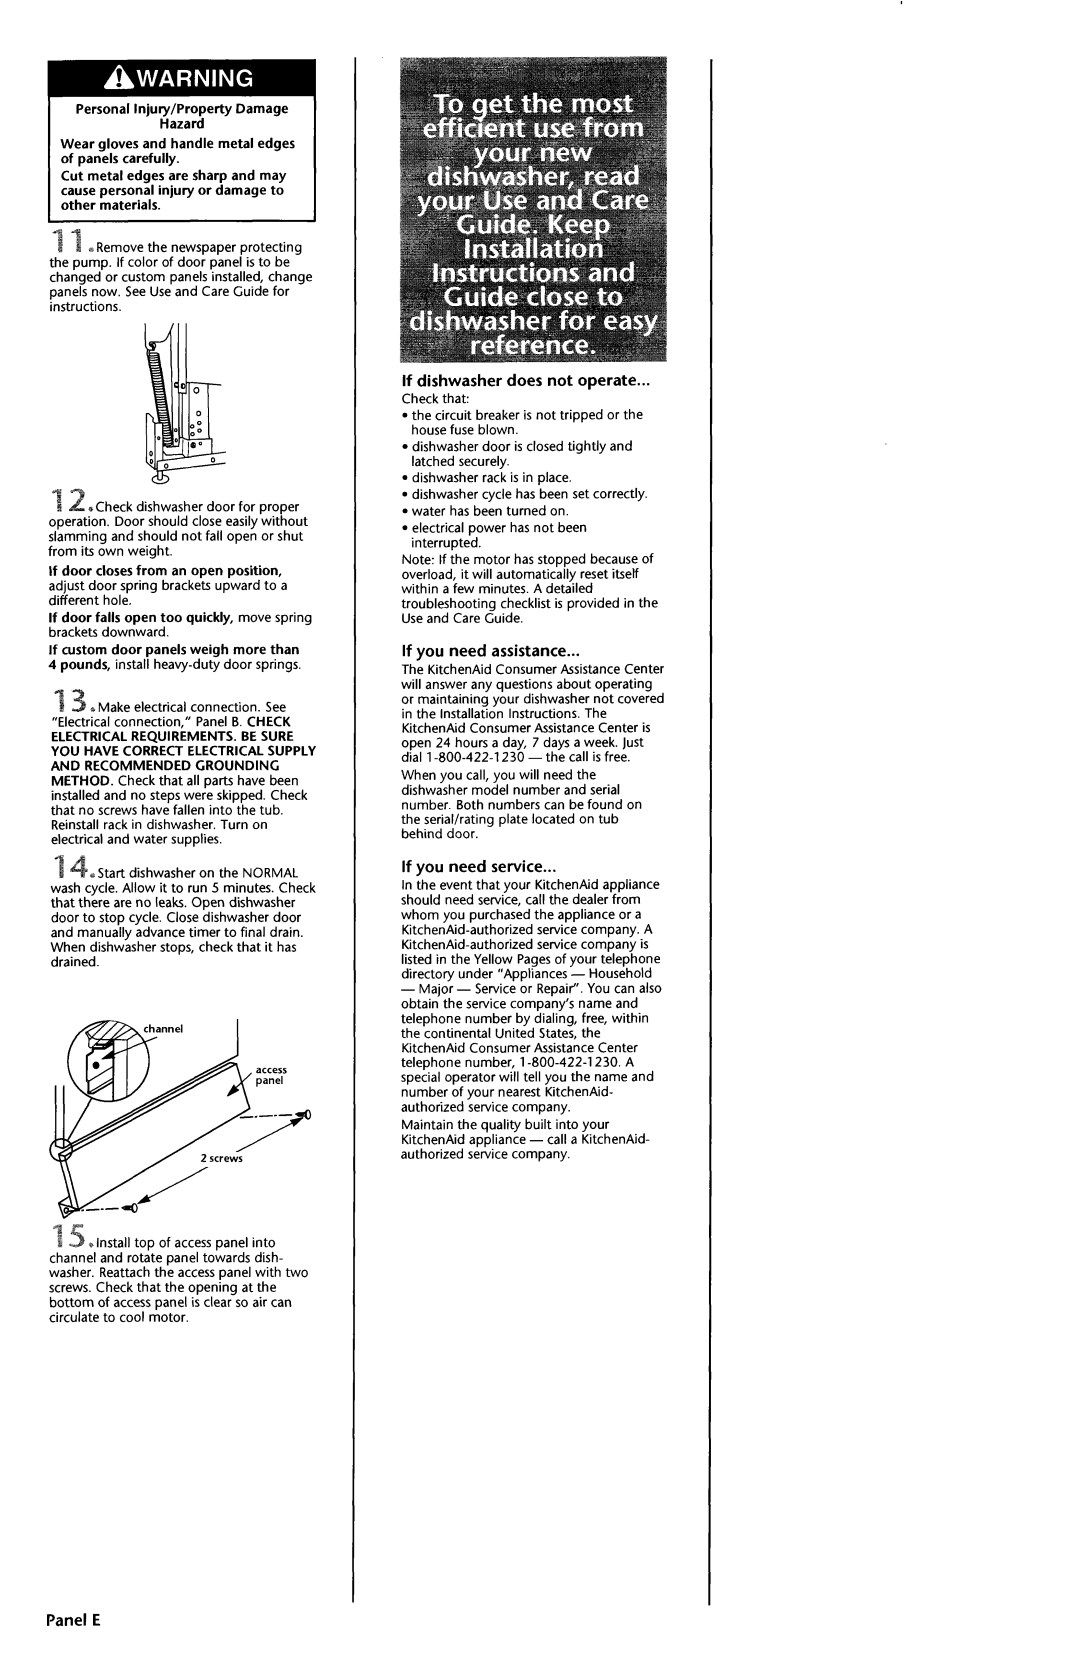 KitchenAid 97415 14 If dishwasher does not operate, If you need assistance, If you need service, Panel E 